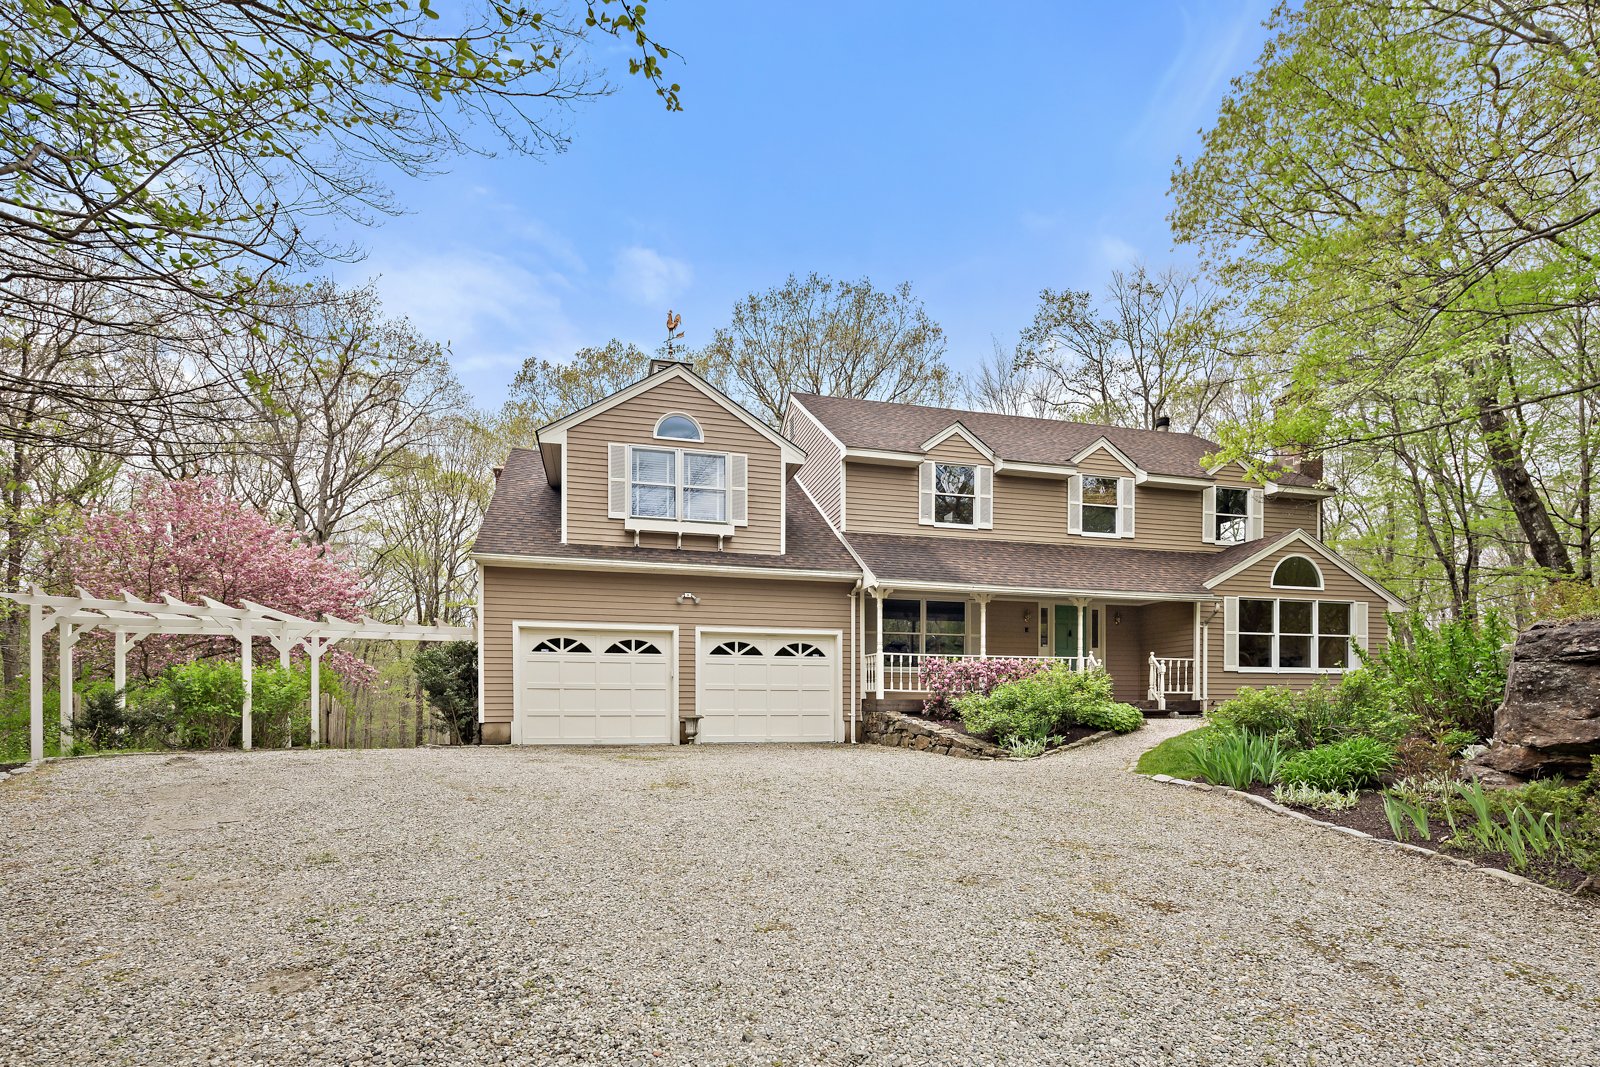 Front of home at 14 Echo Hill Road Weston CT-1.jpg